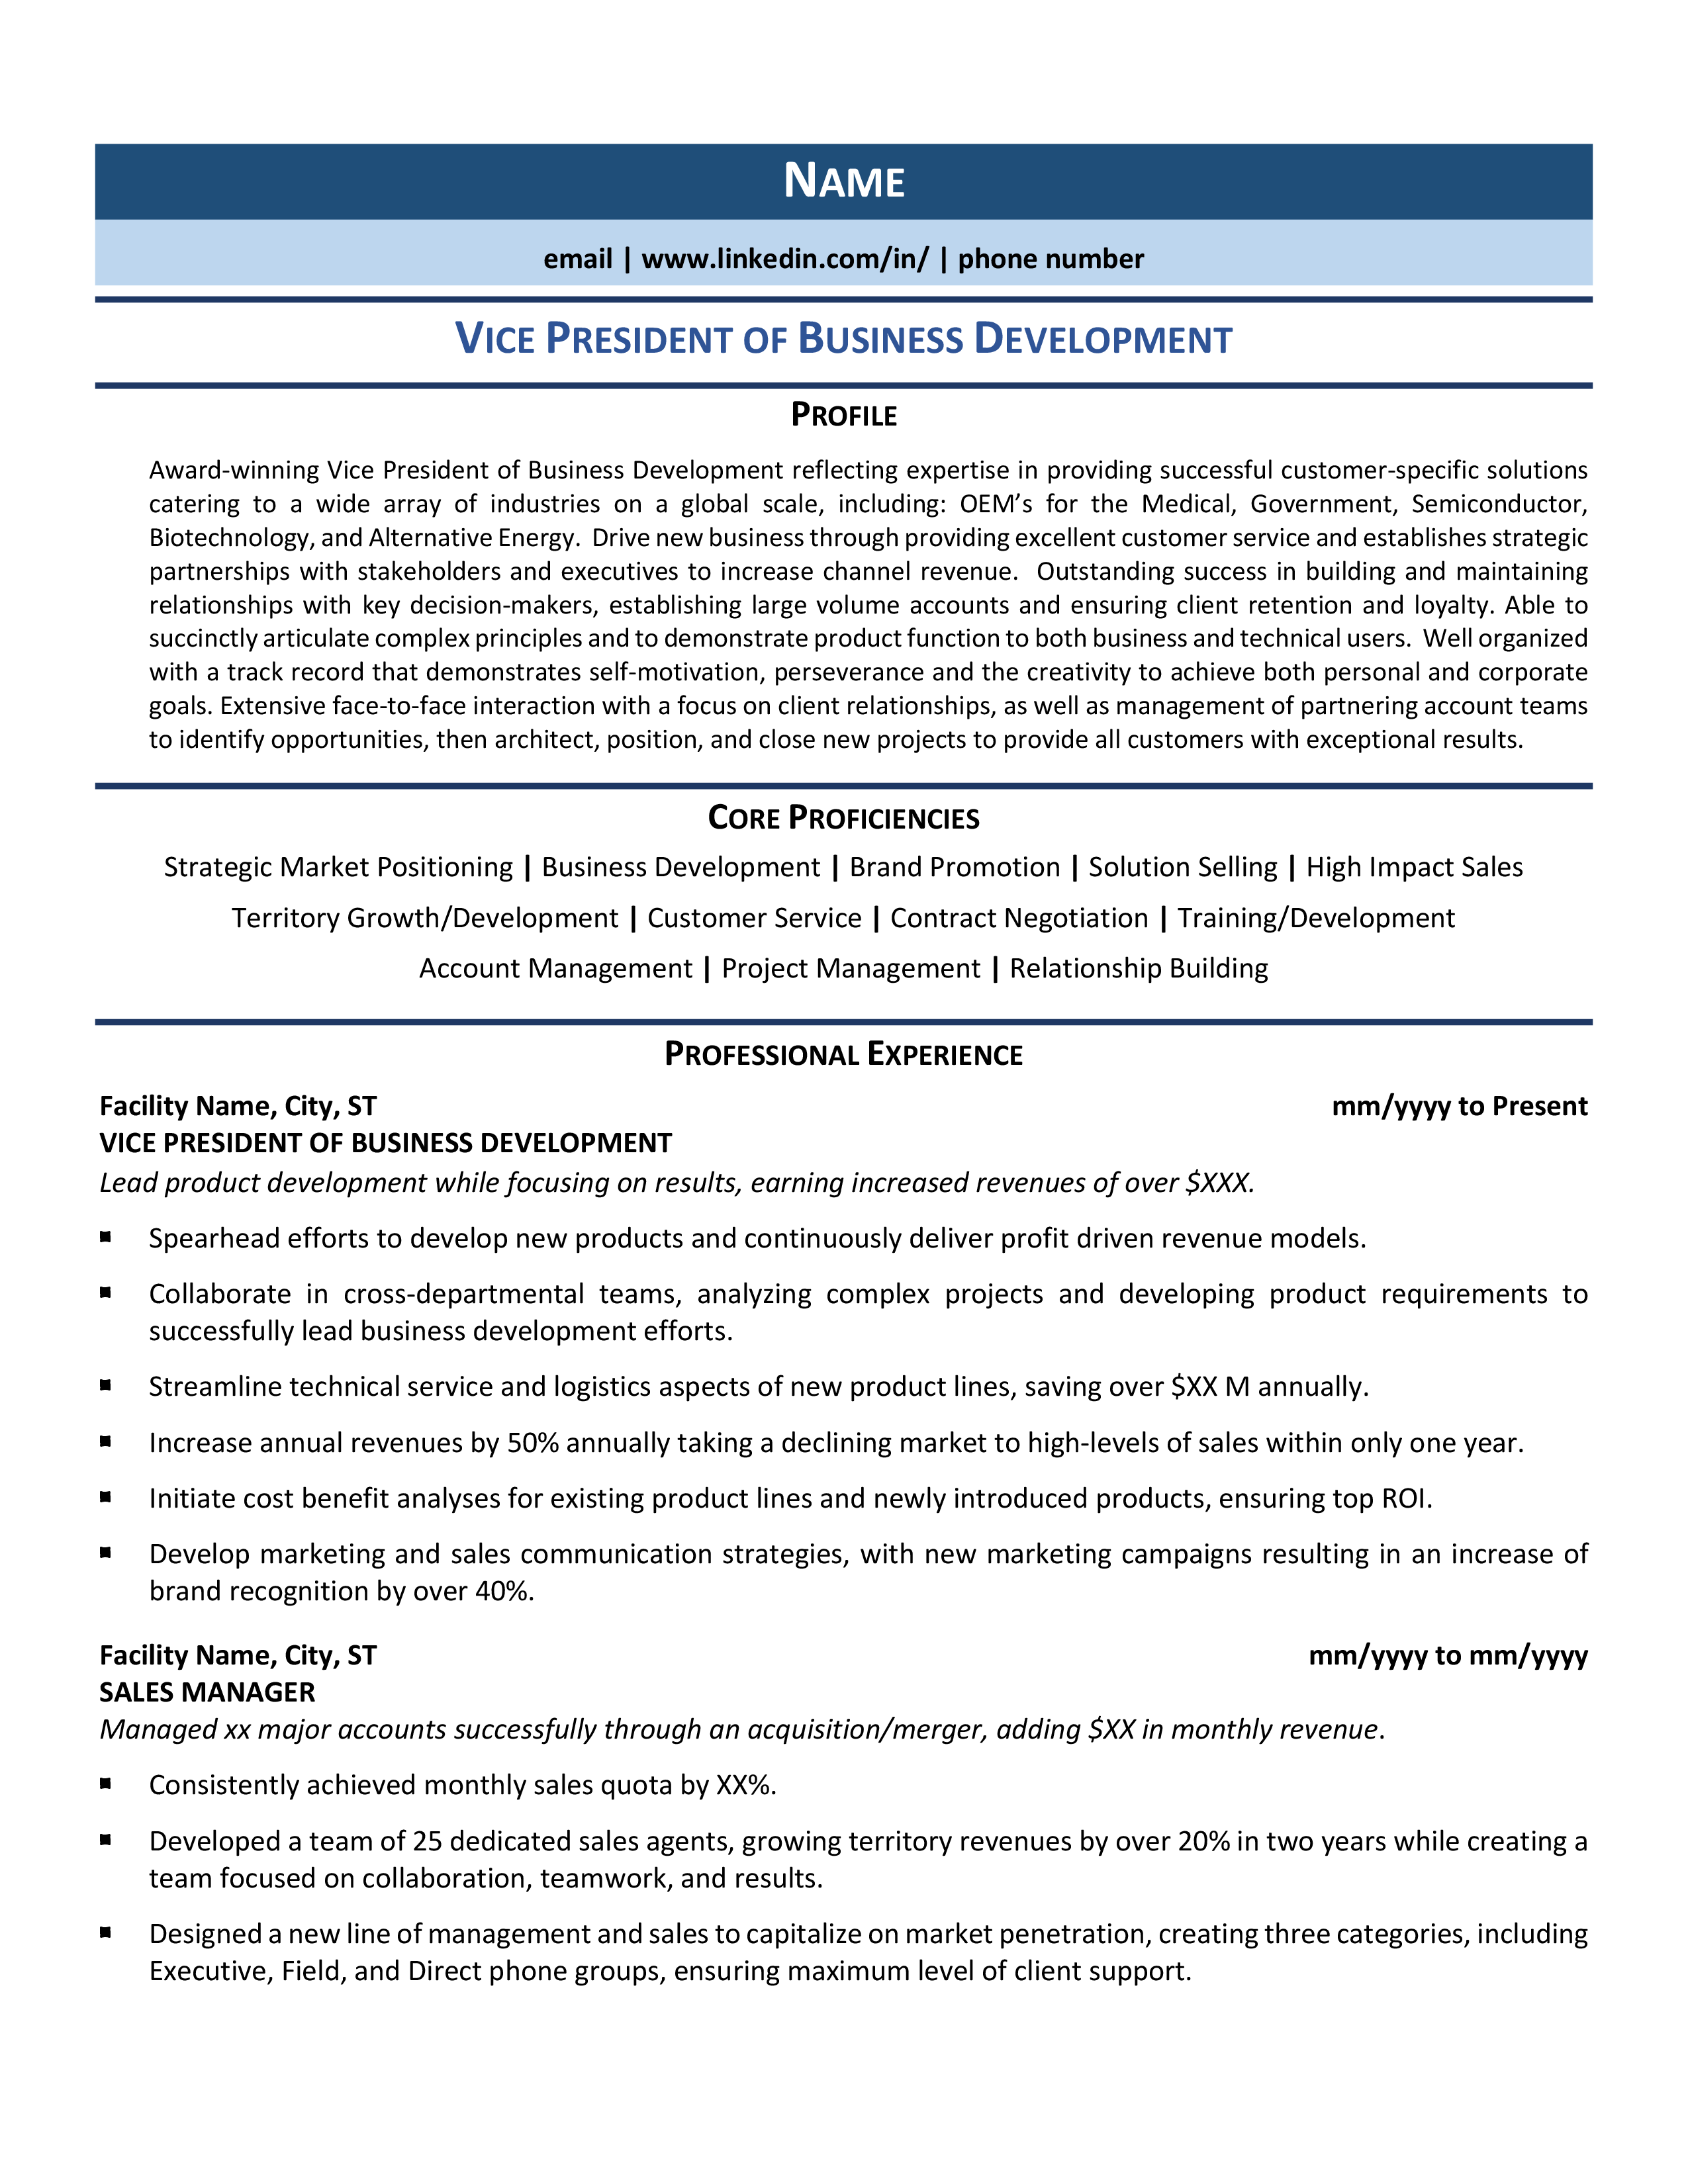 examples of vp resumes